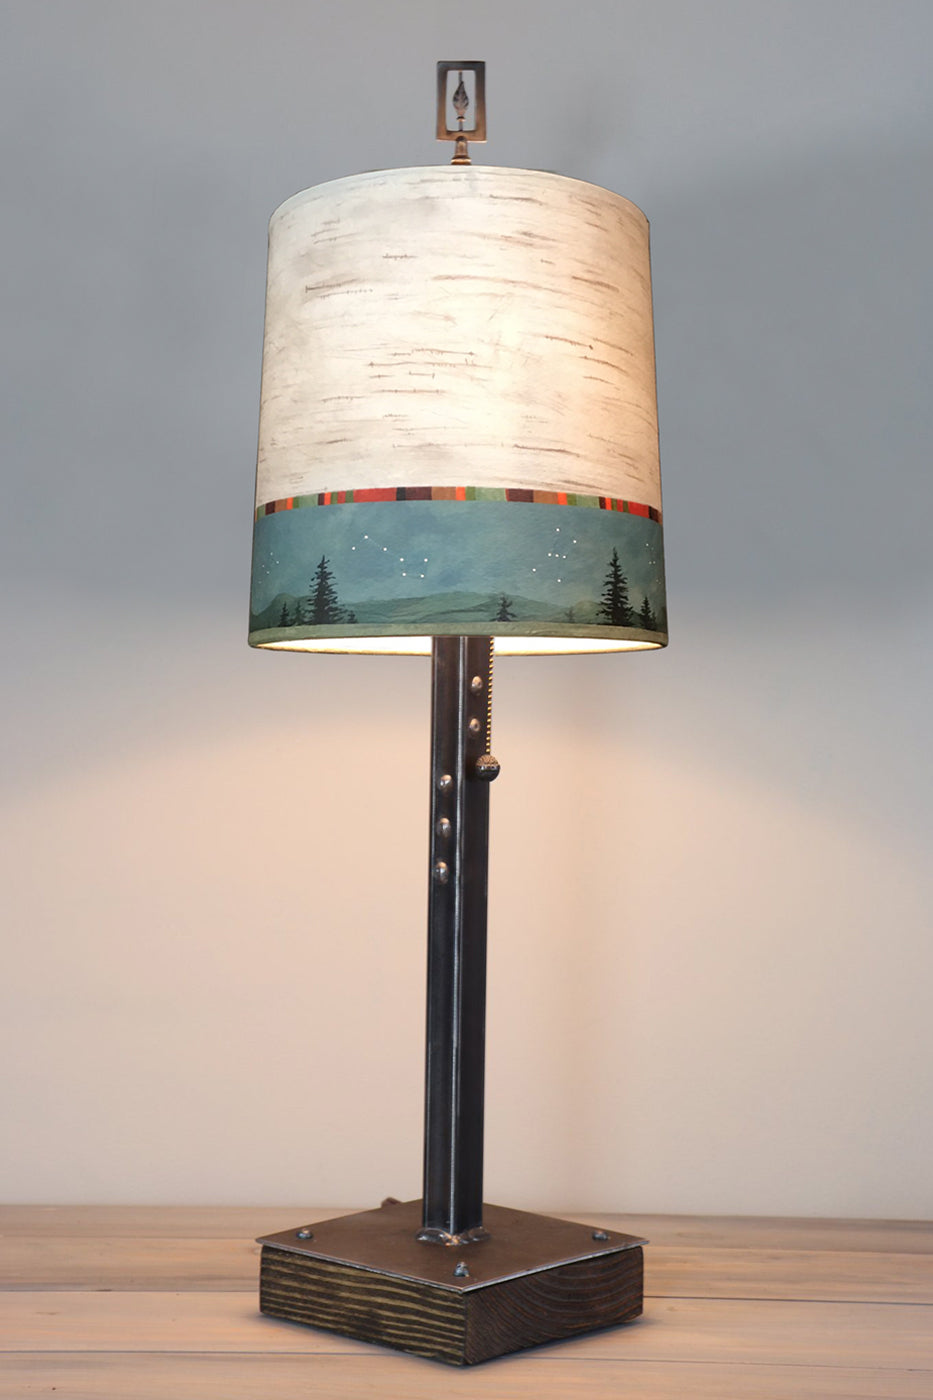 Steel Table Lamp on Wood with Medium Drum Shade in Birch Midnight